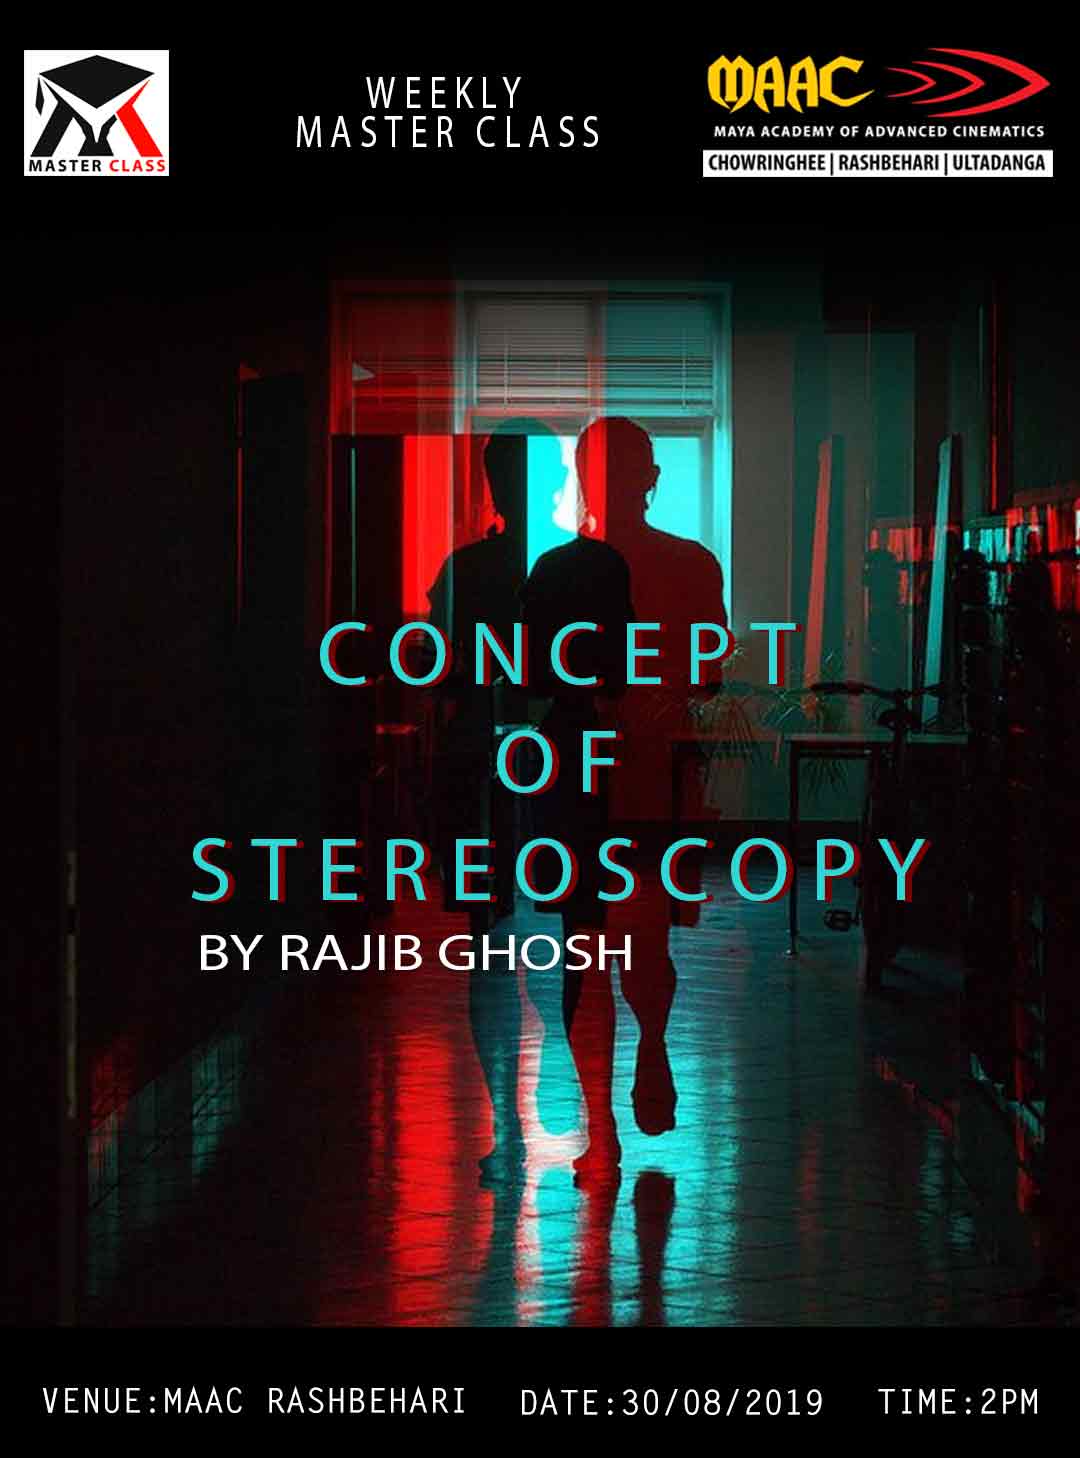 Weekly Master Class on Concept Of Stereoscopy